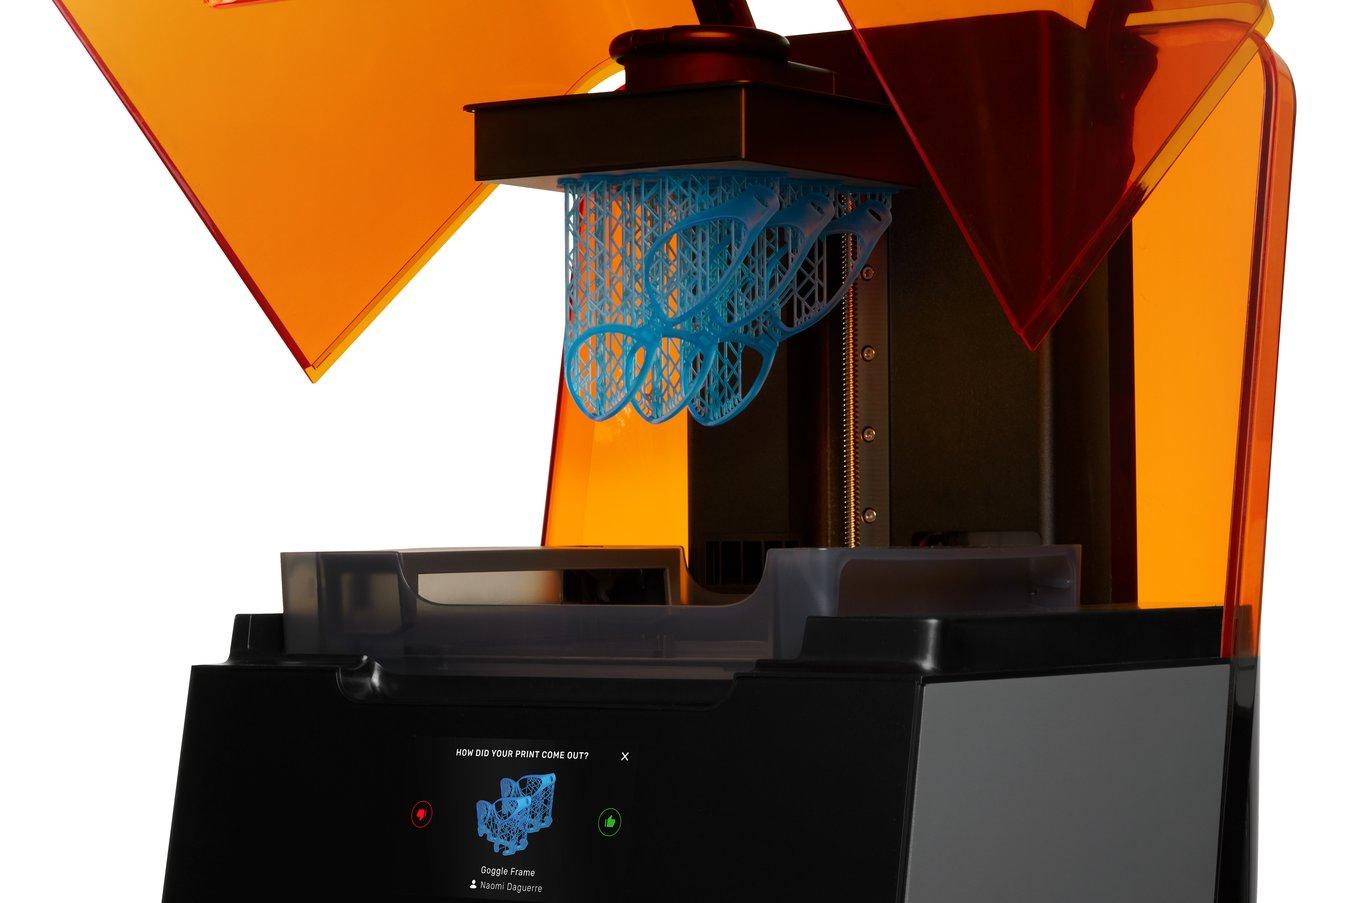 3D printing resolution - Formlabs SLA 3D printers have high Z-axis resolution and a low minimum feature size on the XY plane, allowing them to produce fine details.